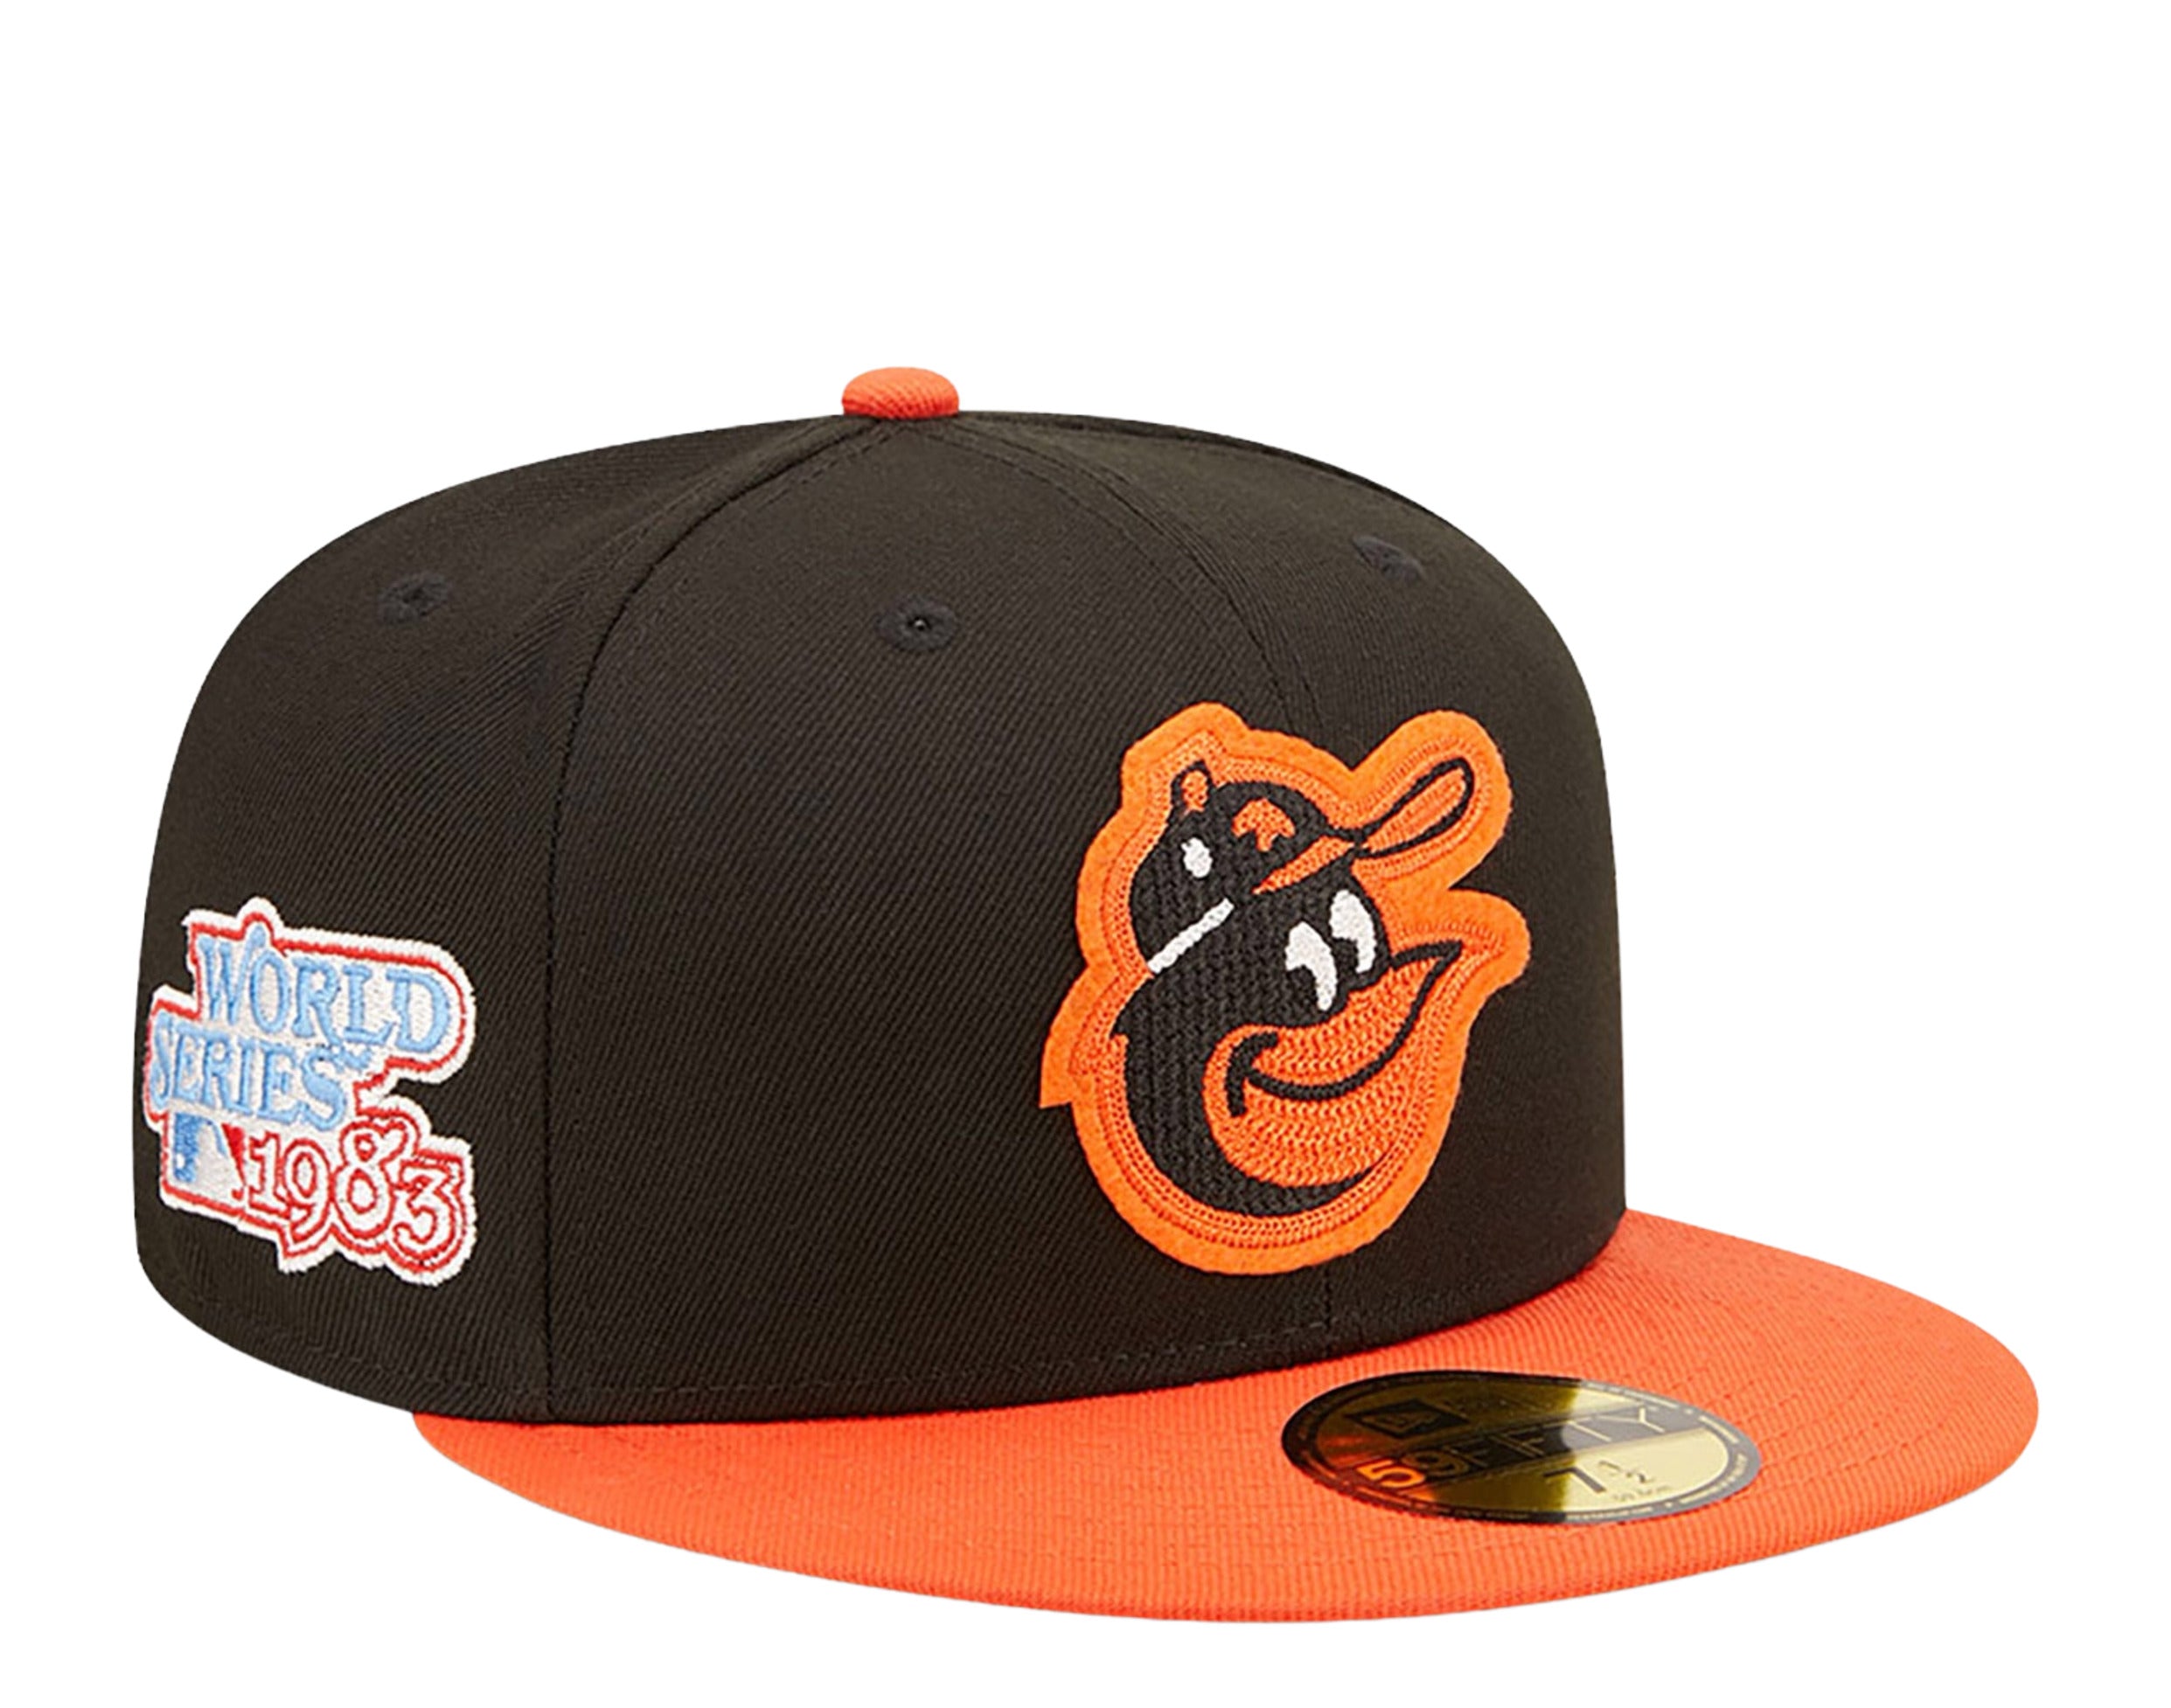 Baltimore Orioles Cooperstown Mitchell & Ness MLB Baseball